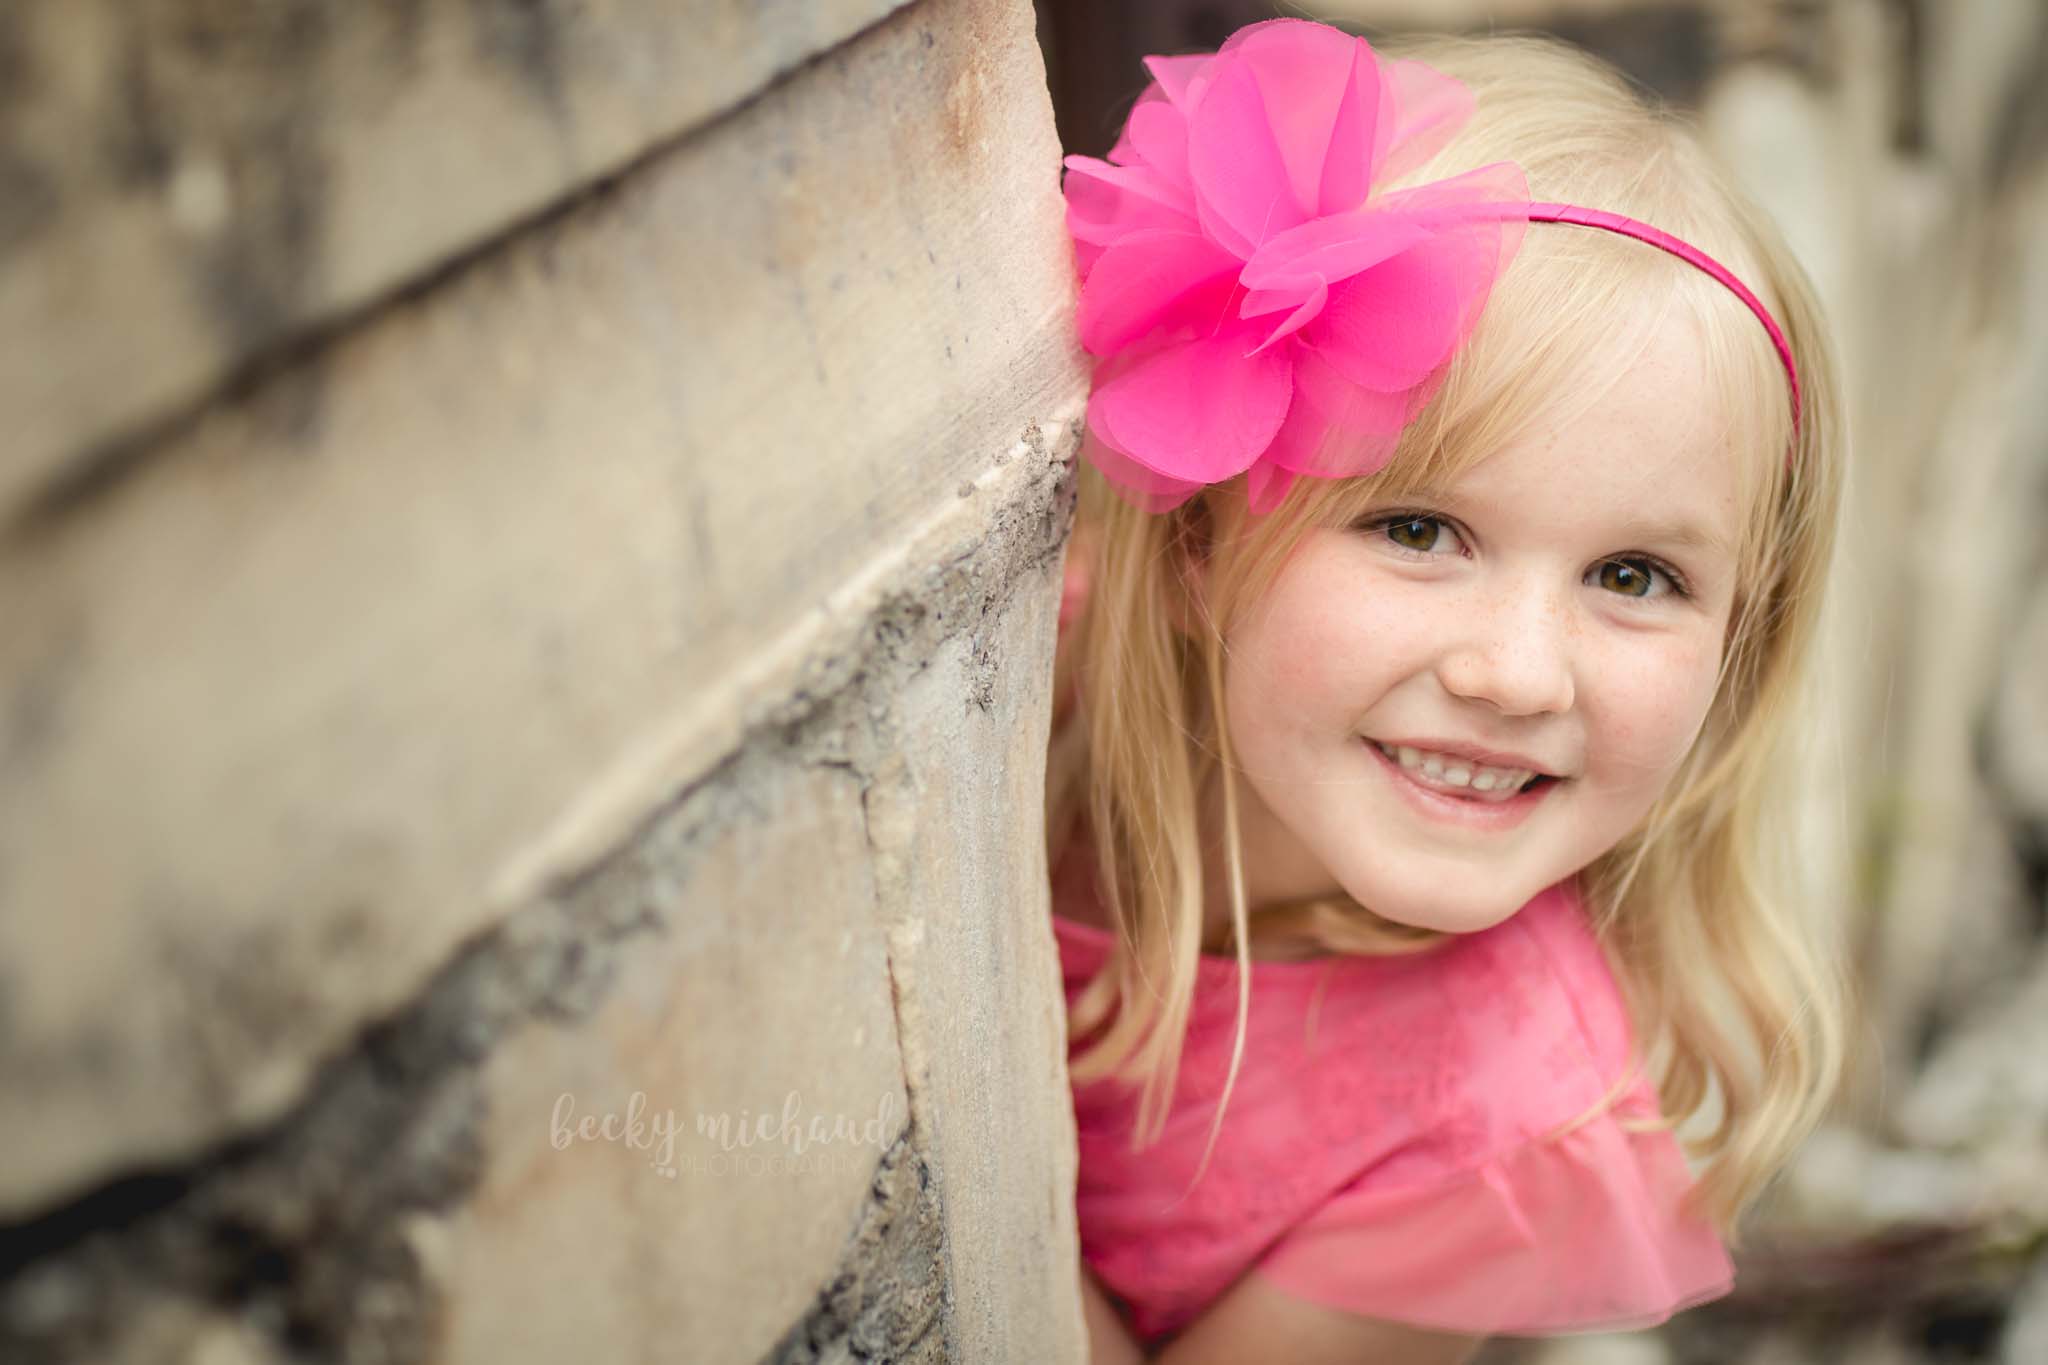 A little girl wearing a pink dress peeks out around a wall